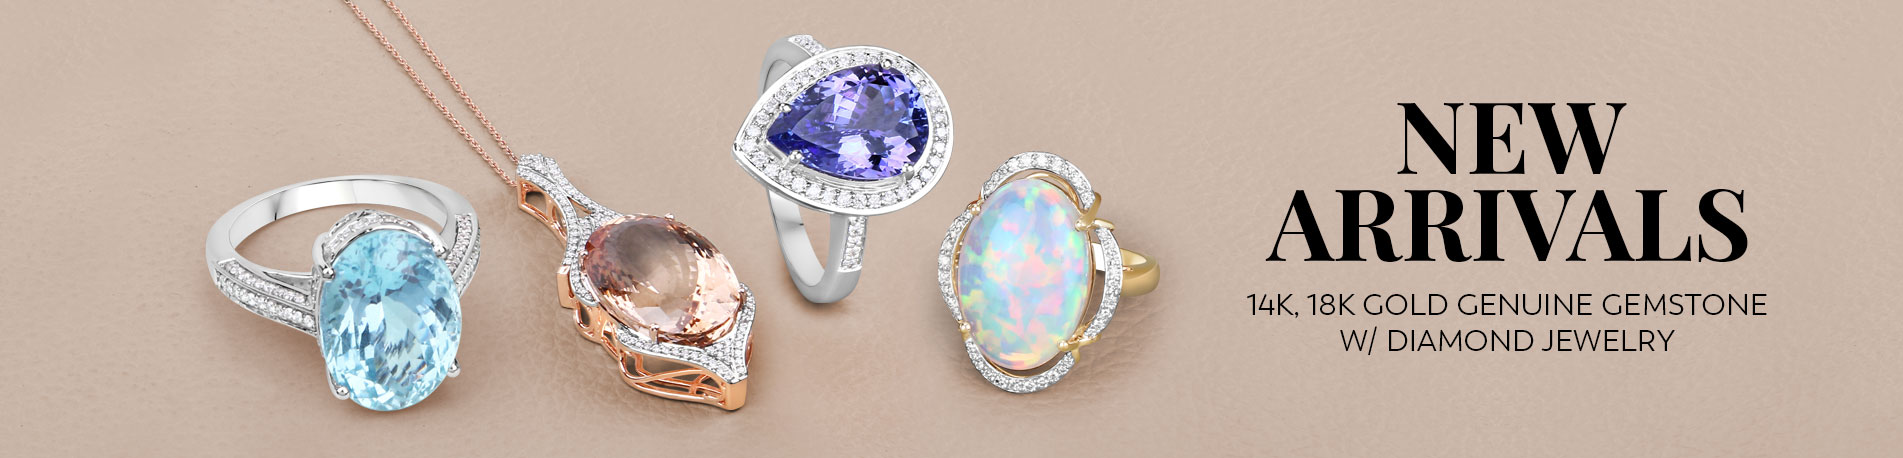 New Arrivals – Unveiling exquisite 14K Gold gemstone adorned with sapphire, tanzanite, morganite, and other precious gemstones, complemented by the brilliance of diamonds